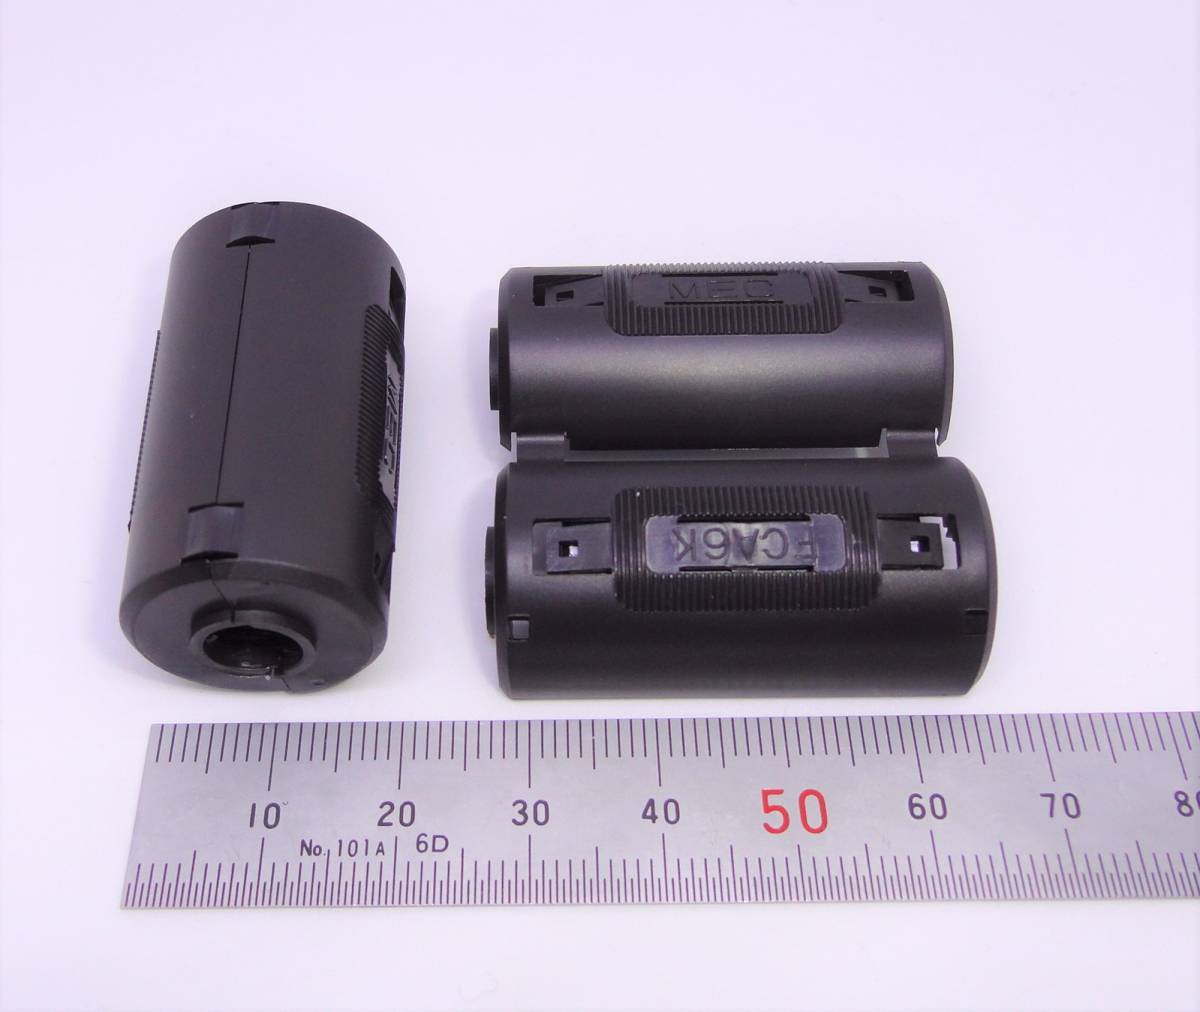  sleeve clamp core fe light core Φ5.5~7.0mm inner lock specification . coming off difficult height cycle noise measures around included measures .... only easy 